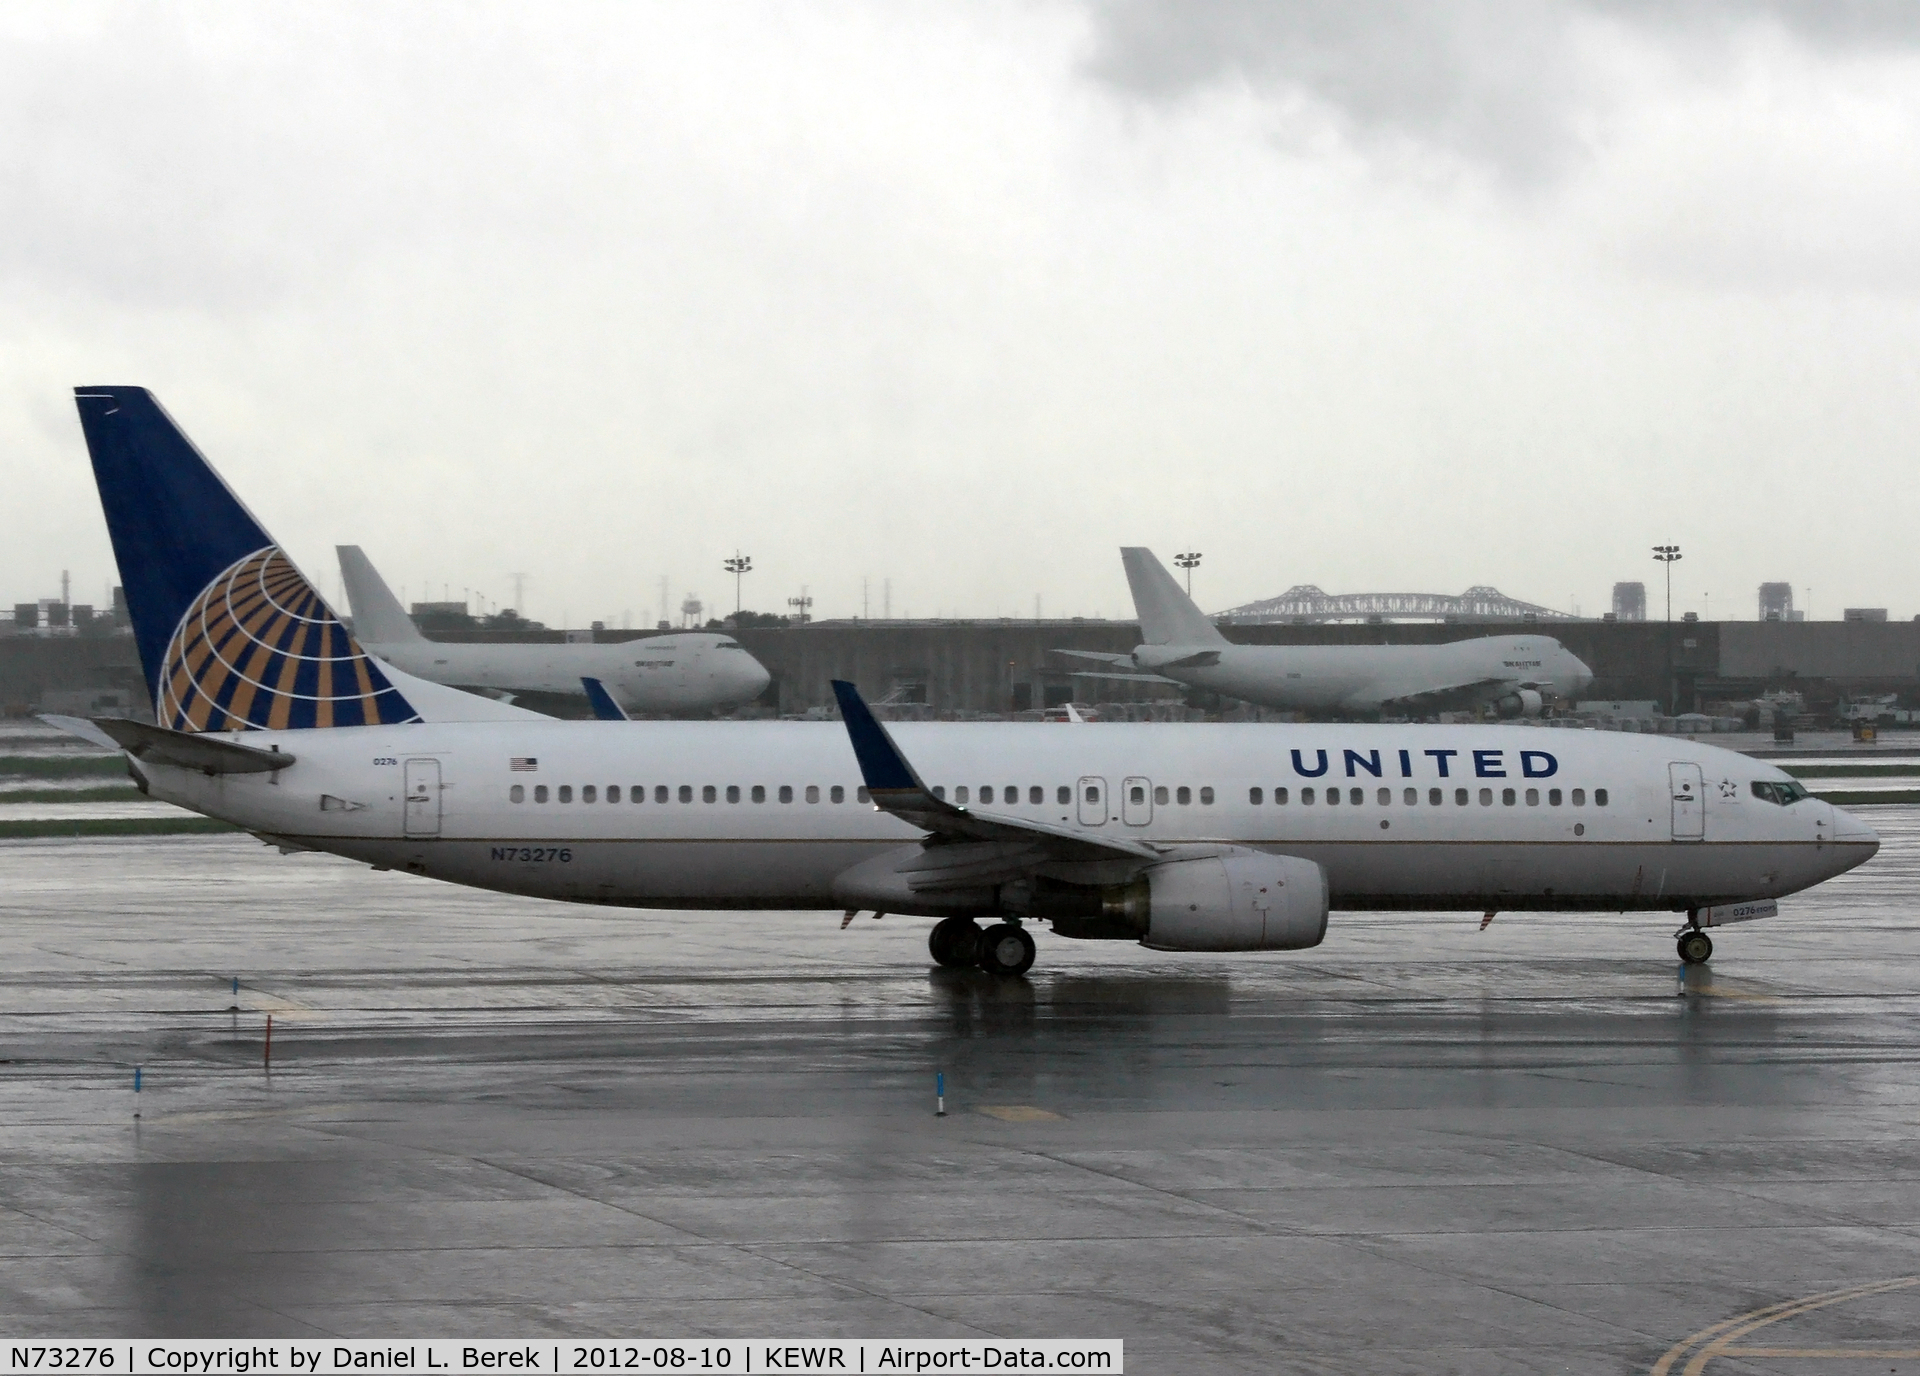 N73276, 2002 Boeing 737-824 C/N 31594, A United 737, originally built for Continental in 2002, braves a downpour at Newark Liberty International Aiport.